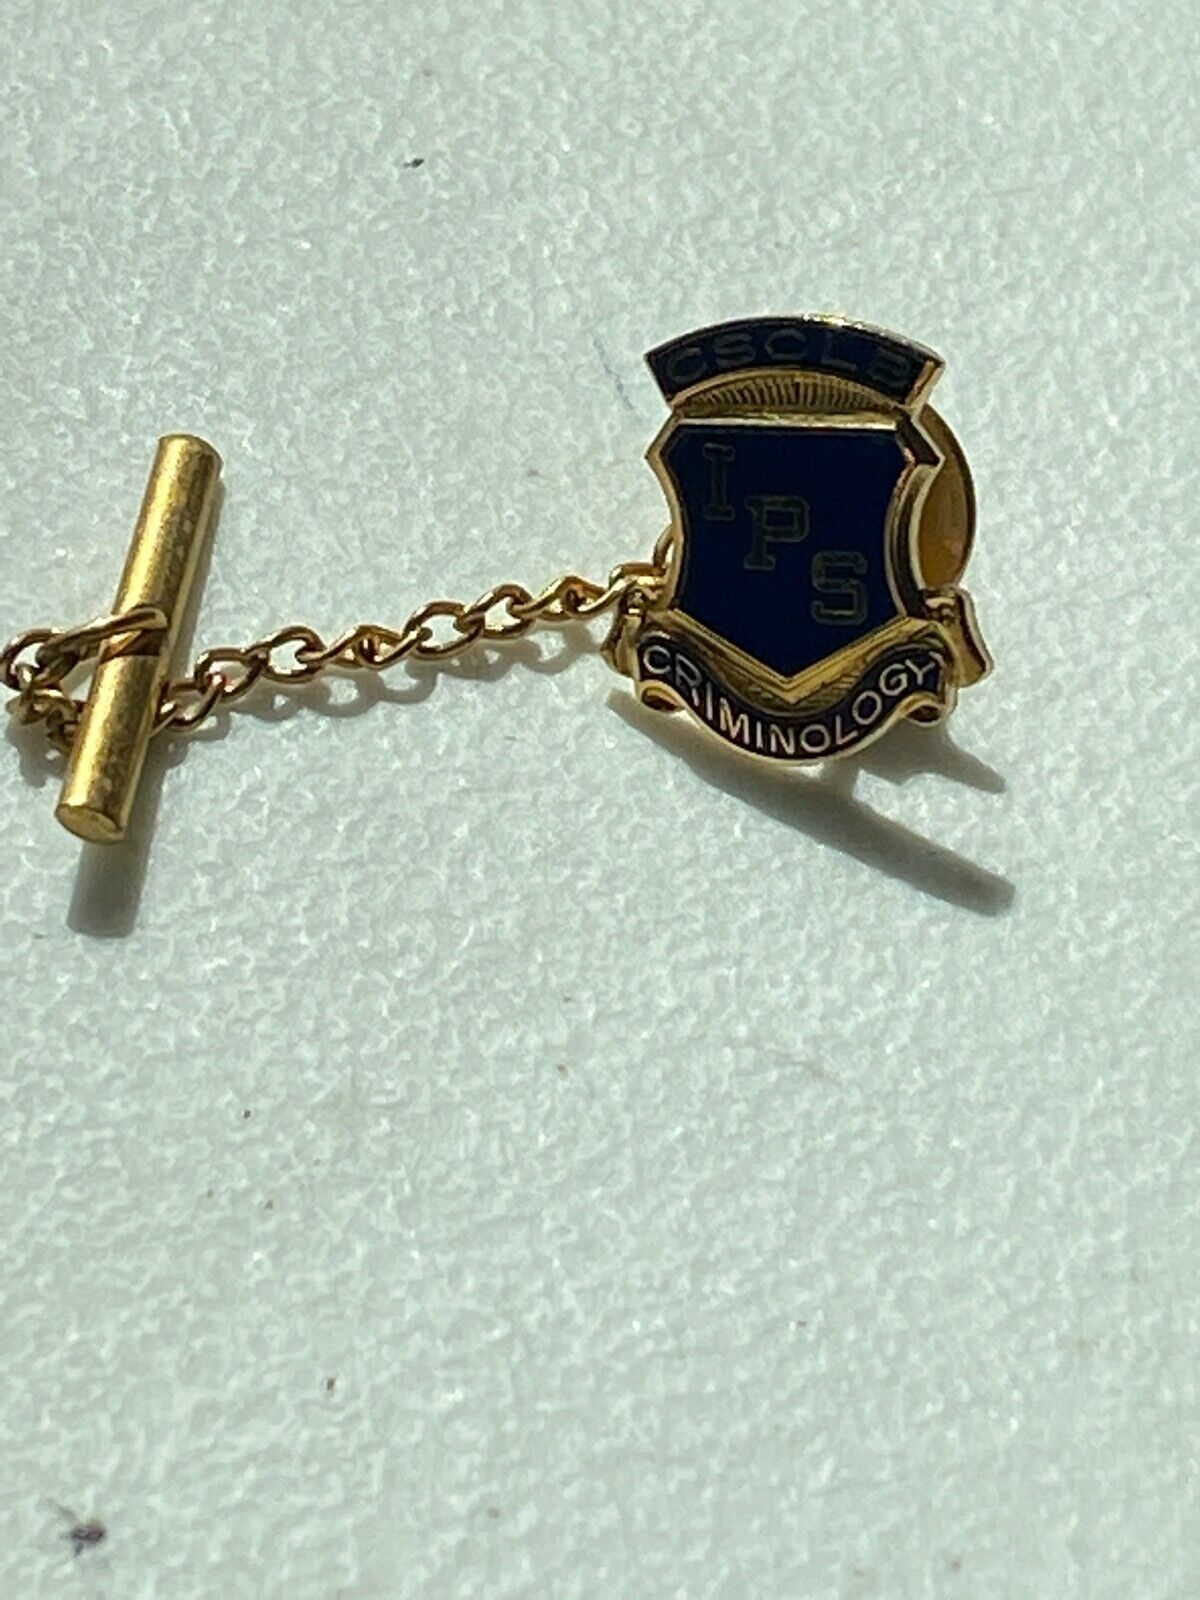 CSCLB IPS (Indian Police Service) Criminology tie tack gold to...